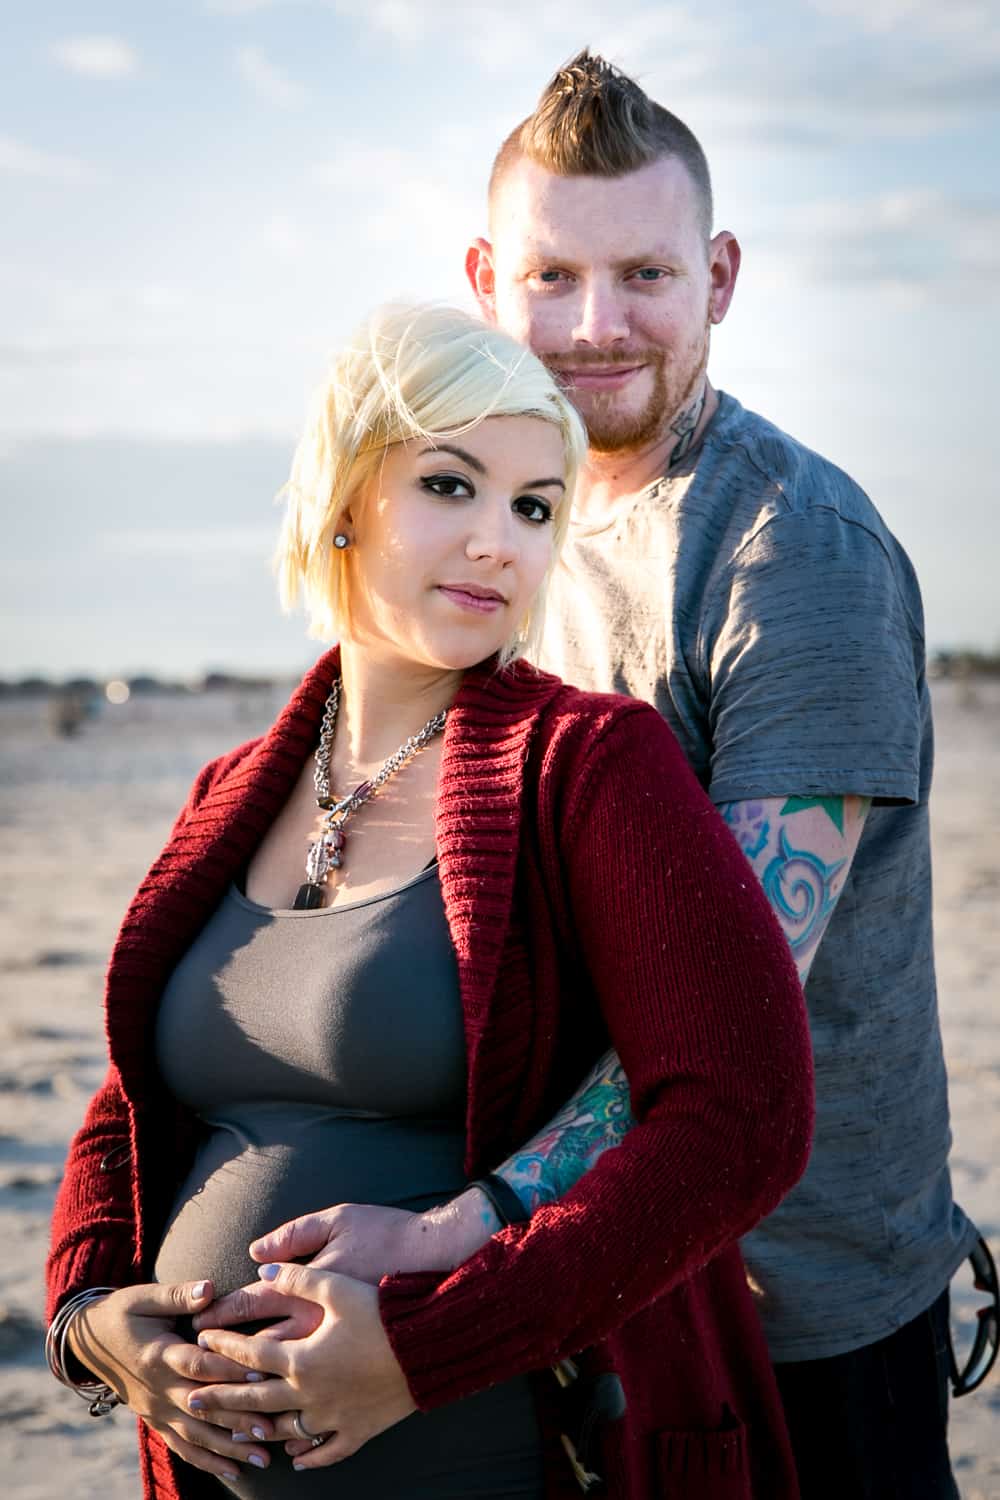 Pregnant blond woman and partner on beach for an article on how to prepare for a maternity photo shoot